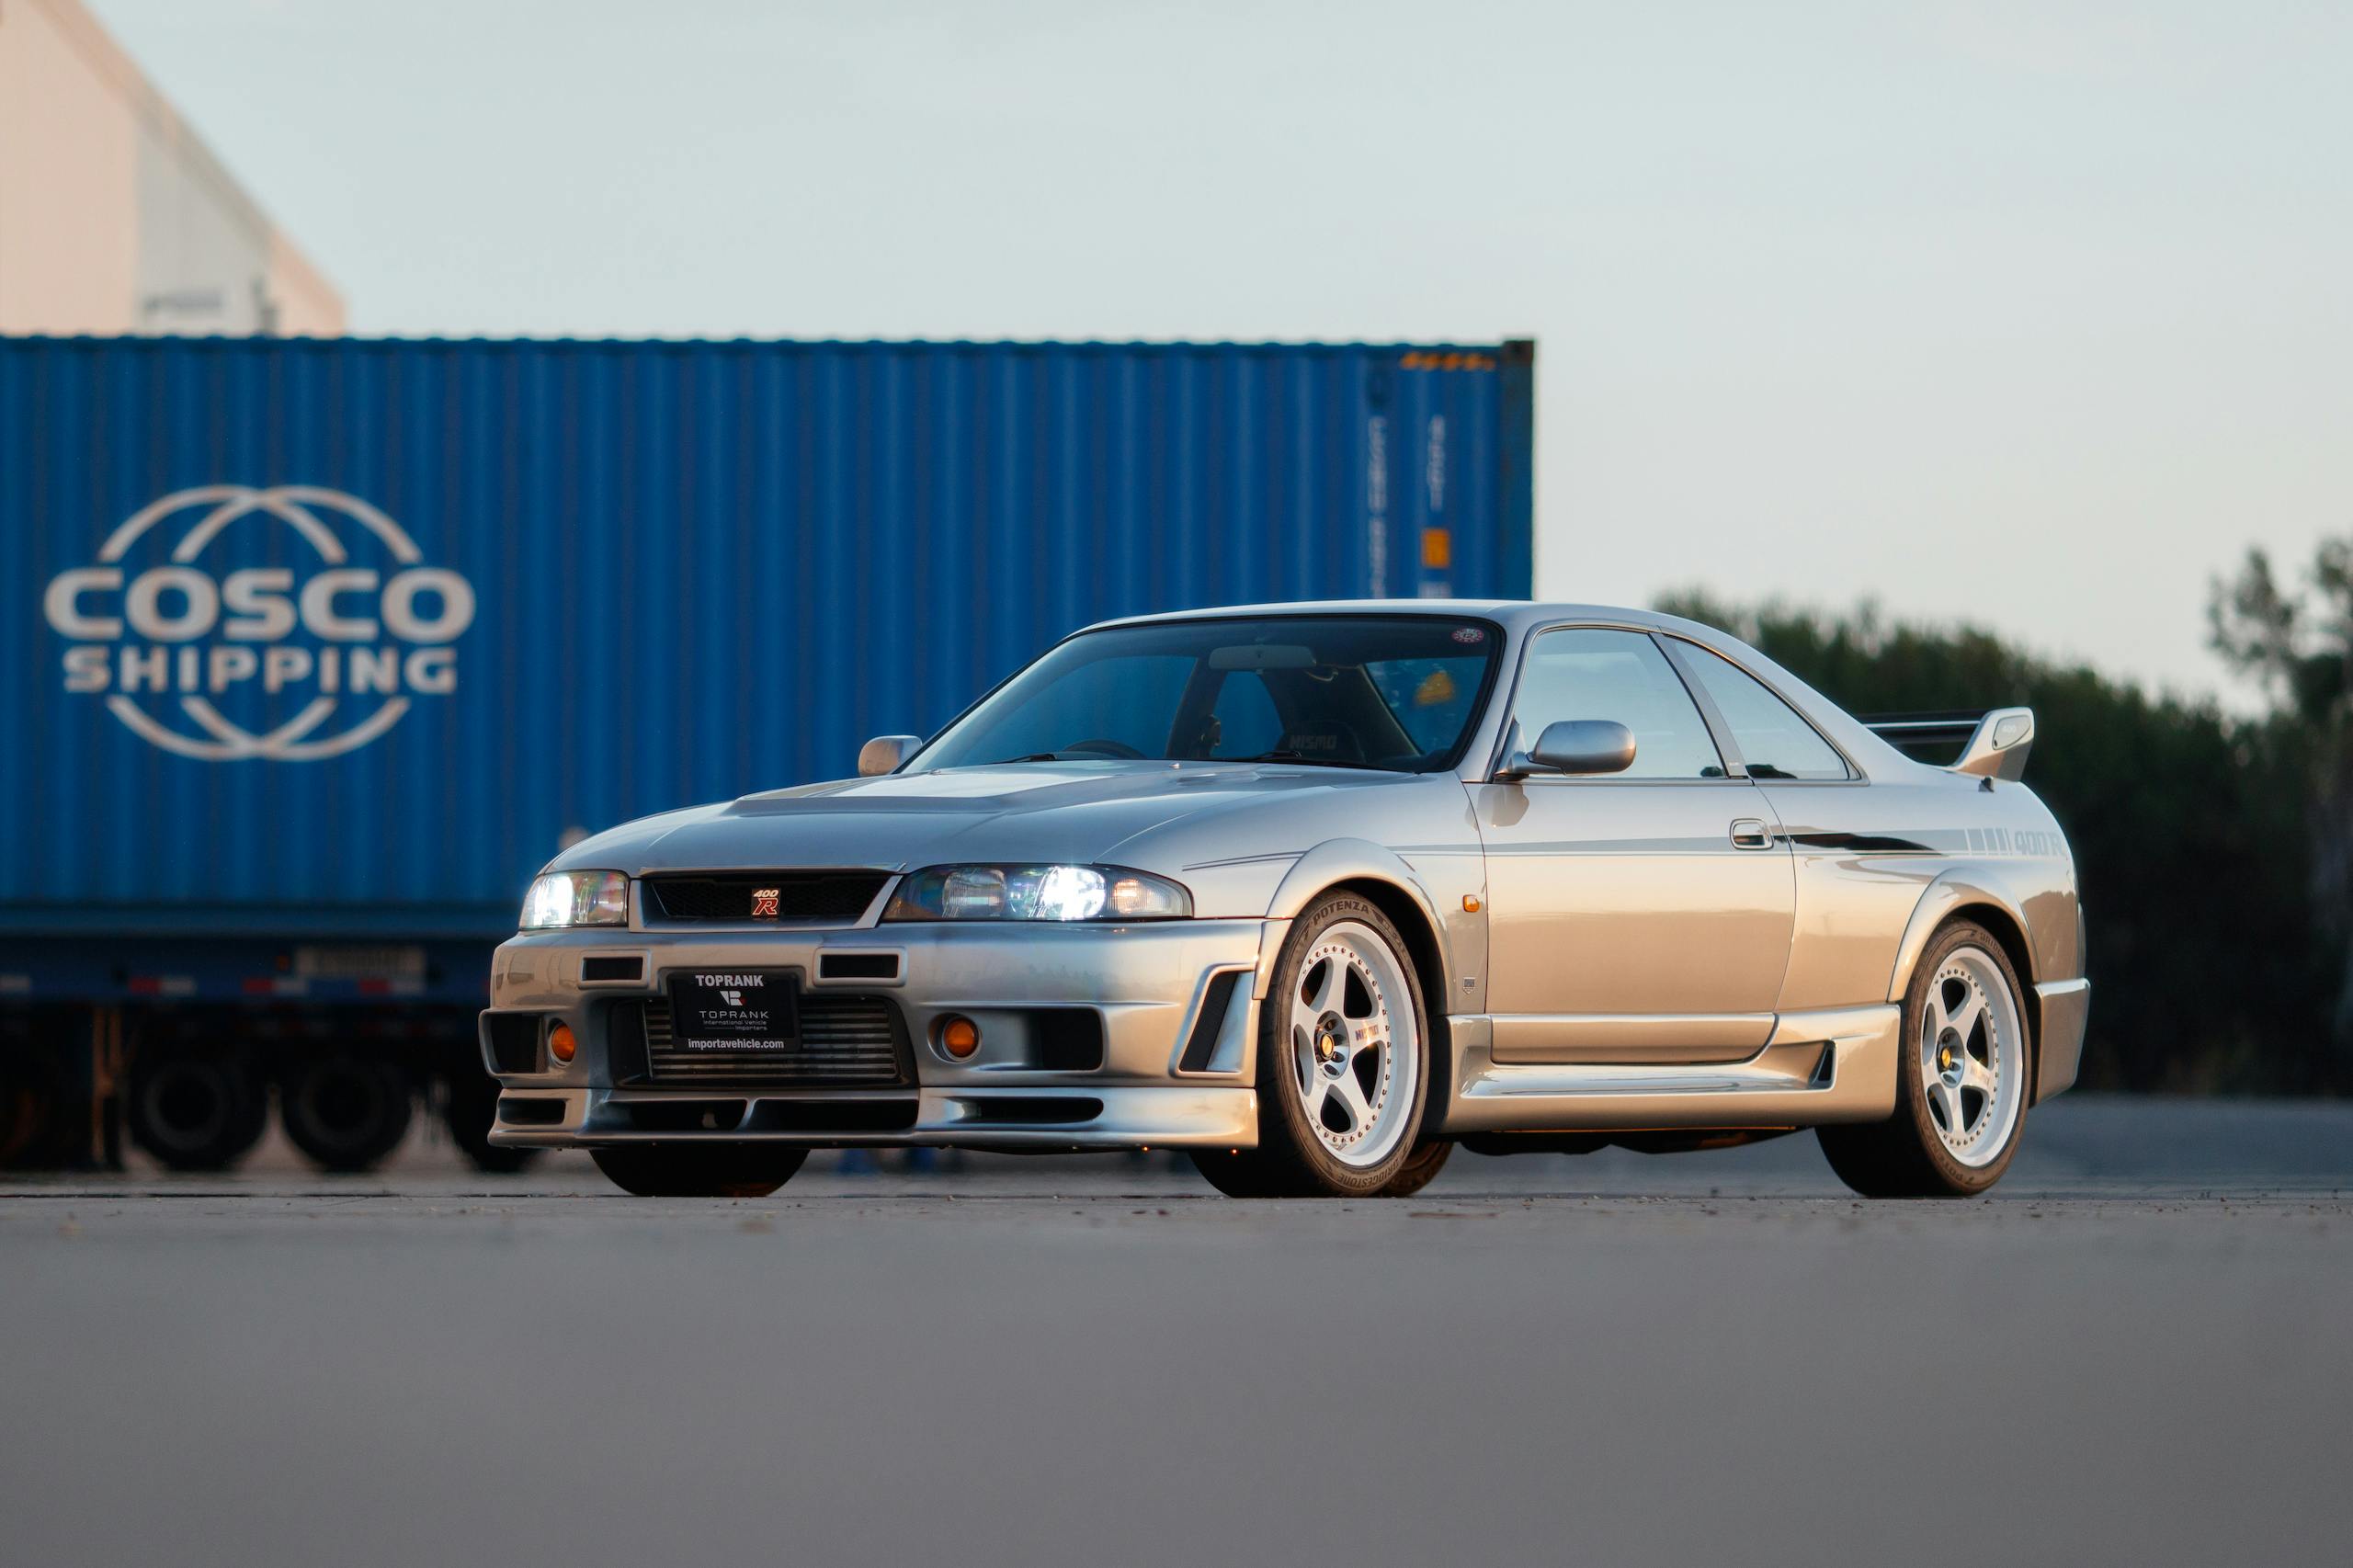 Nissan Skyline GT-R R34: review, history and specs of an icon